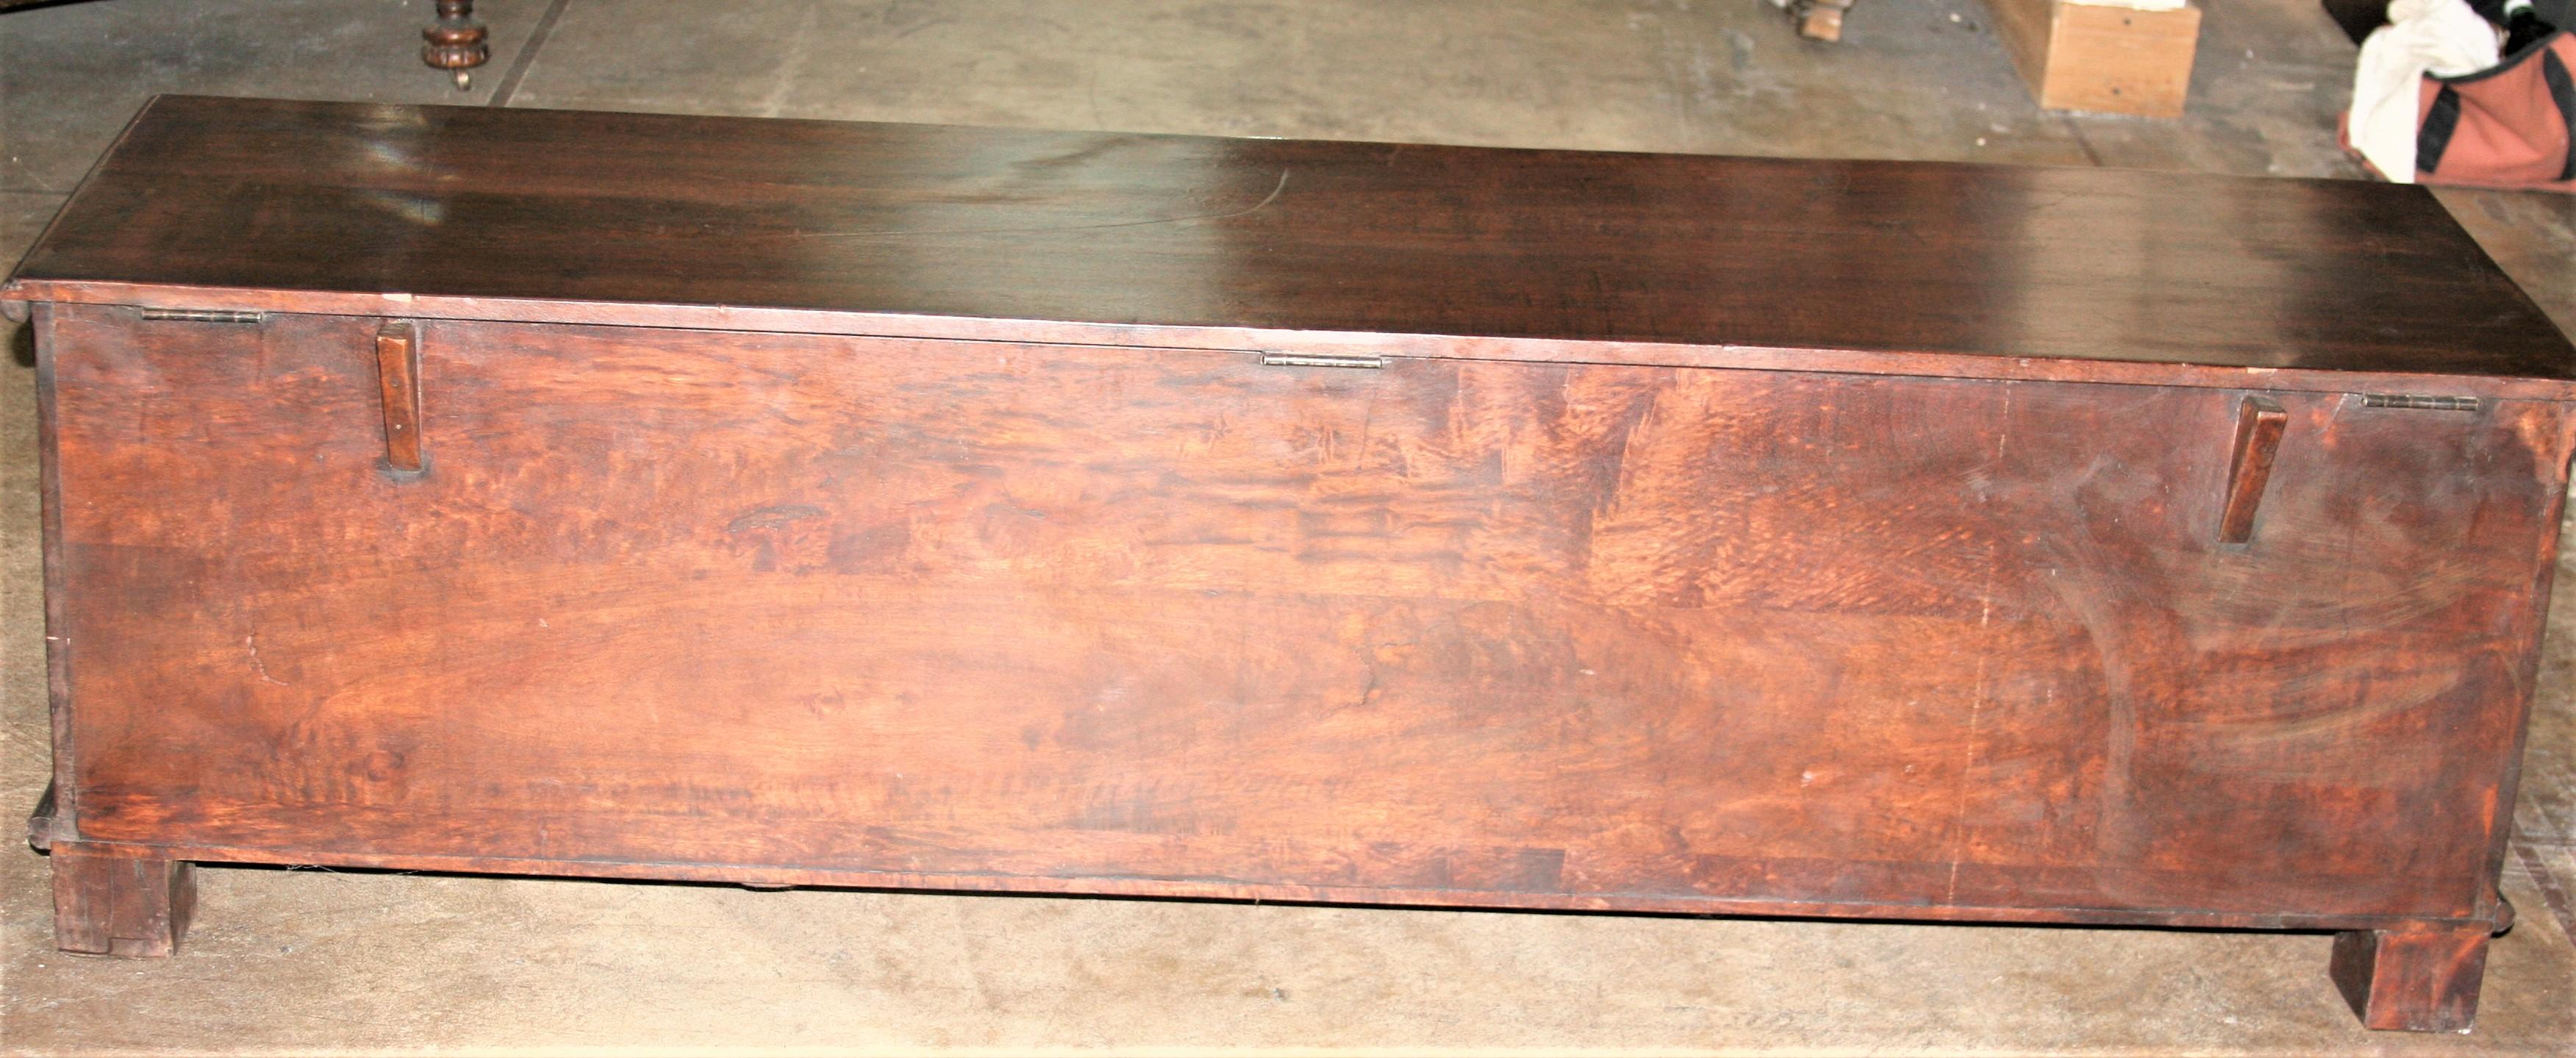 19th Century Solid Teak Wood Linen Chest Modified as Bench with Storage 4